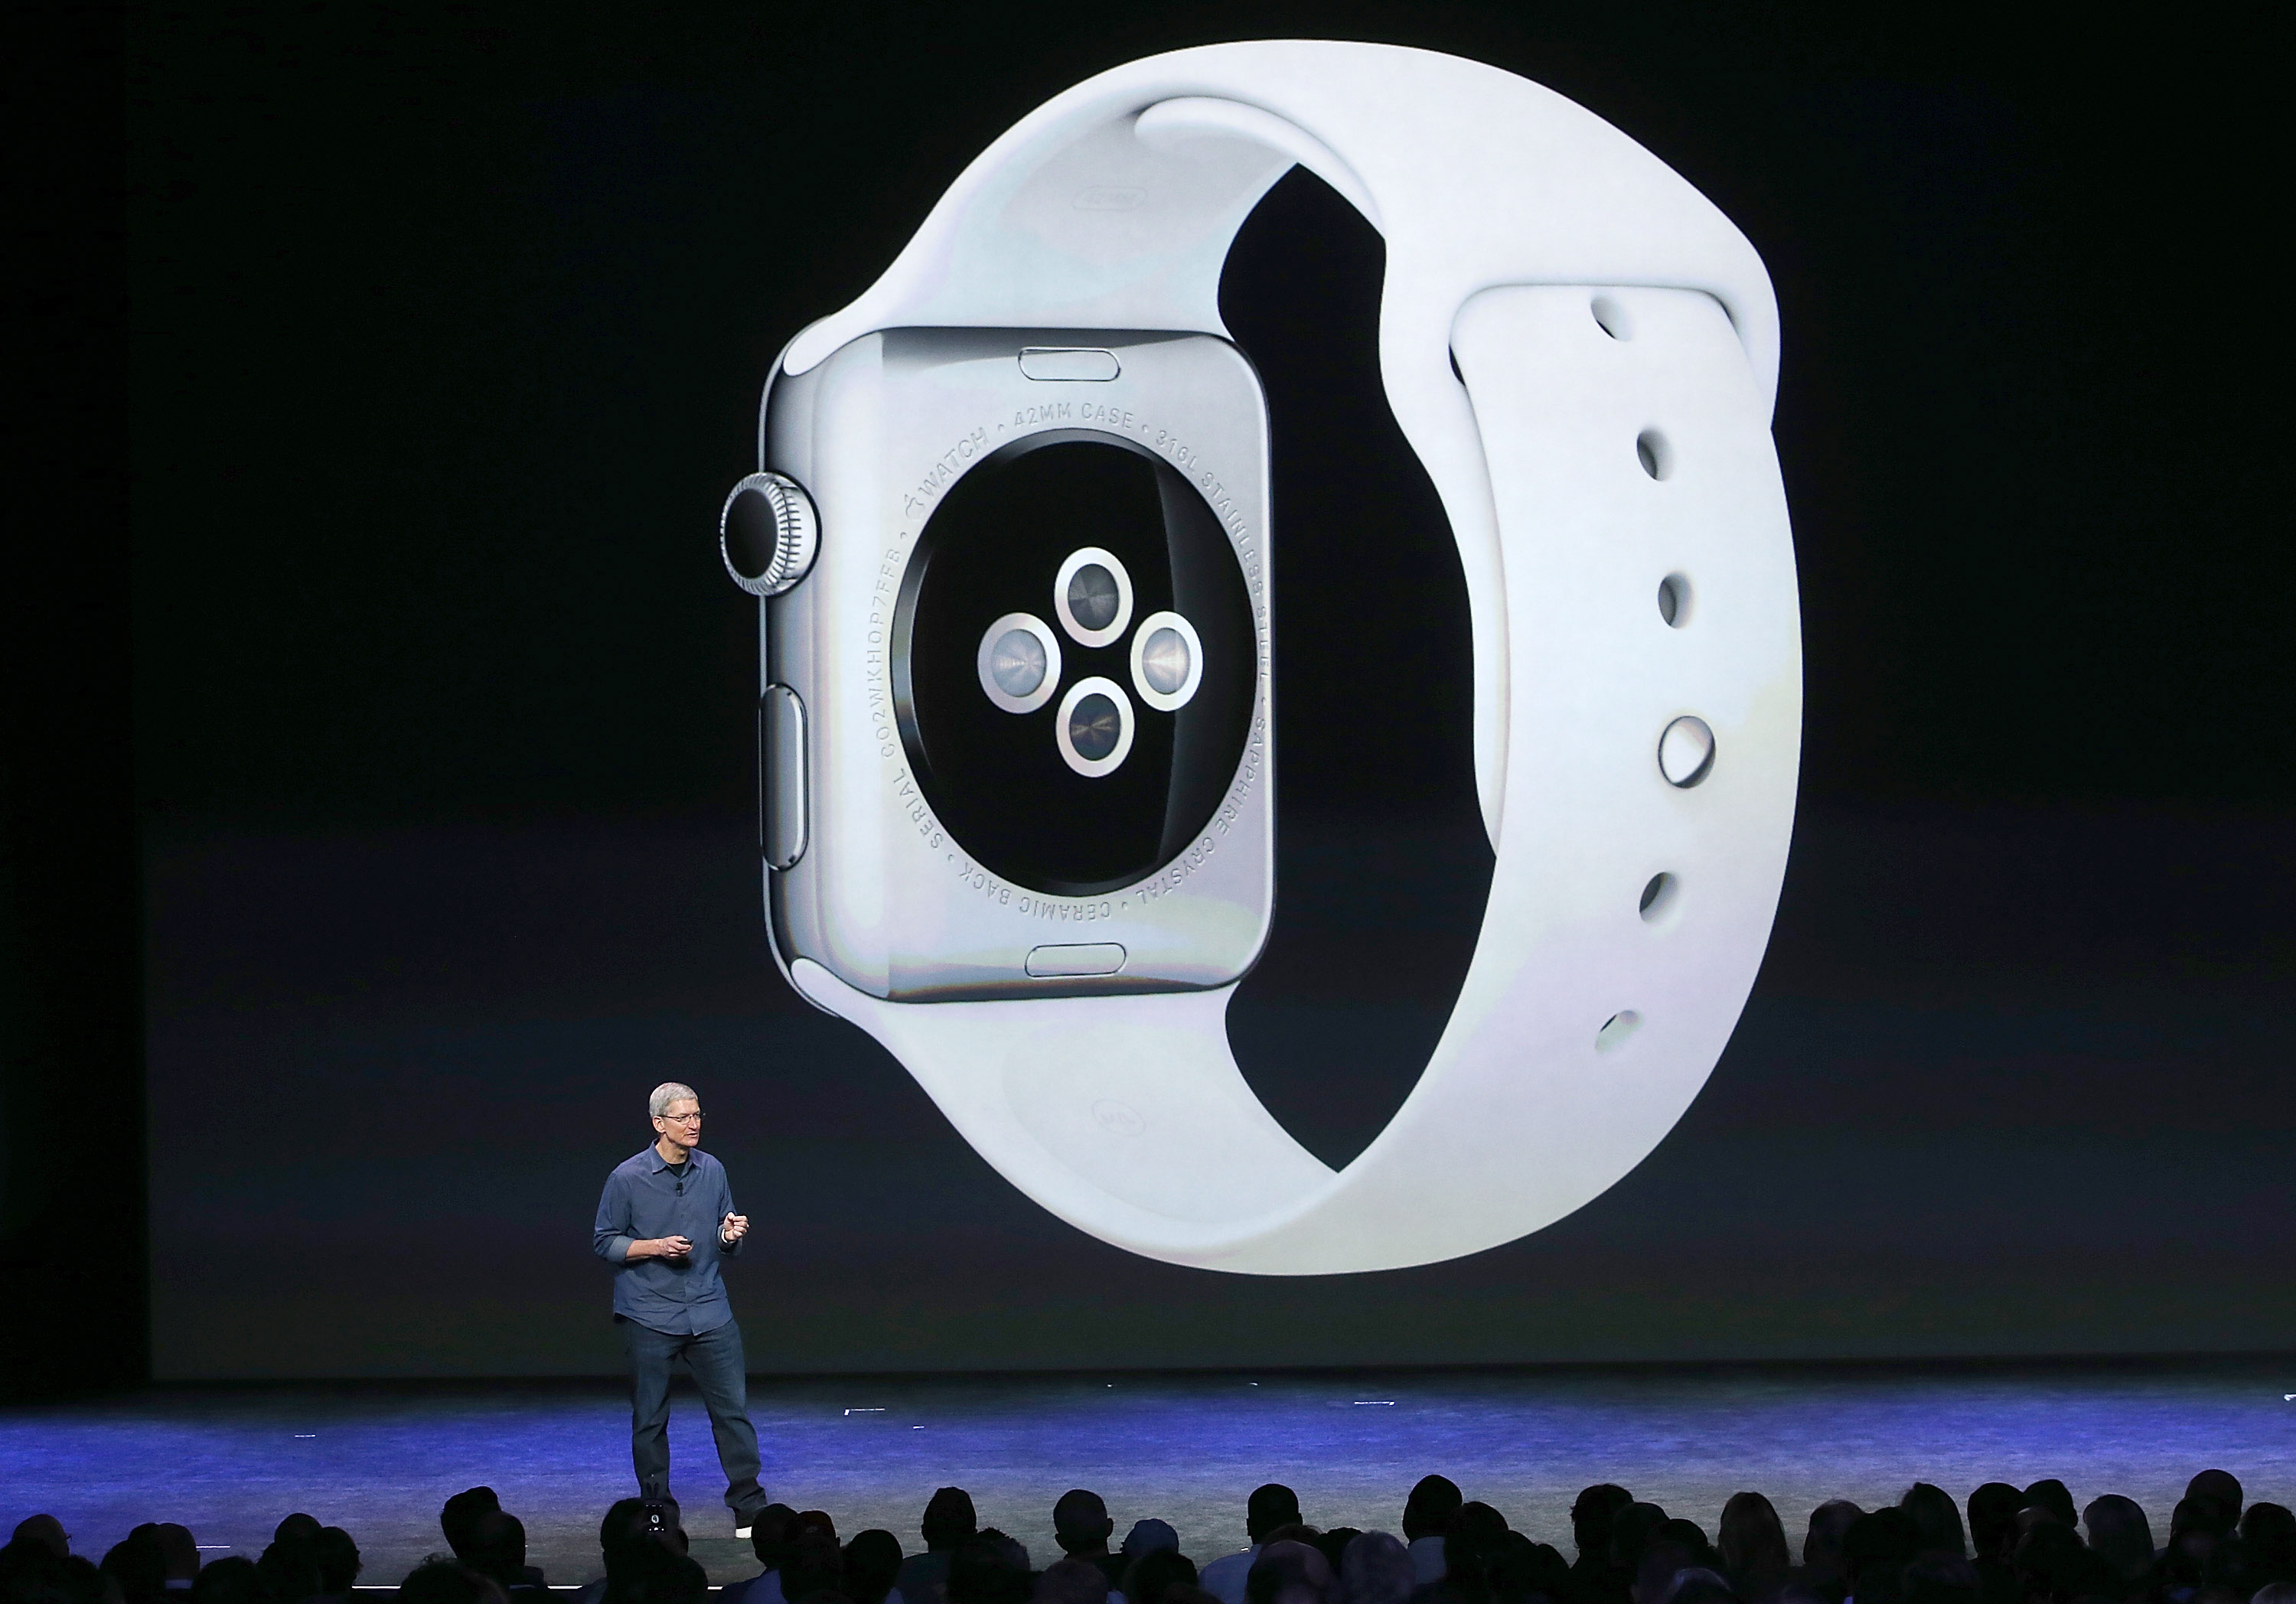 Apple CEO Tim Cook speaks about the new Apple Watch during an Apple special event at the Flint Center for the Performing Arts on September 9, 2014 in Cupertino, California. (Justin Sullivan&mdash;Getty Images)